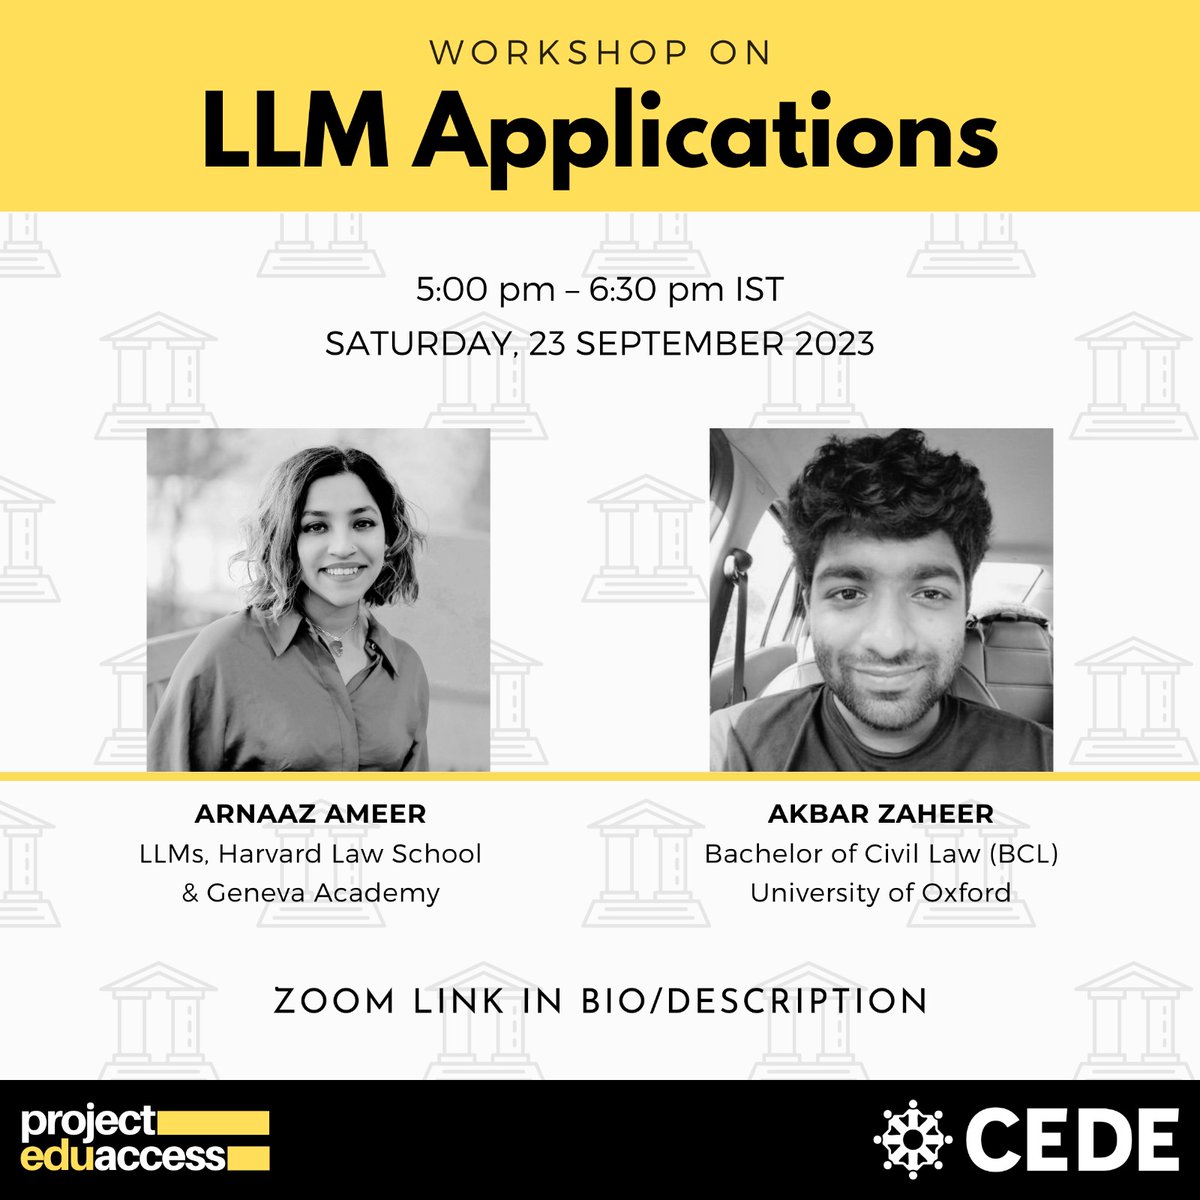 *Workshop on LLM Applications*

Project EduAccess and CEDE are pleased to organise a workshop on LLM applications today, 23 September 2023 from 5.00 PM – 6.30 PM IST.

Zoom Link :- rhodeshouse-ox-ac-uk.zoom.us/j/82023336660

Please Join in large numbers.